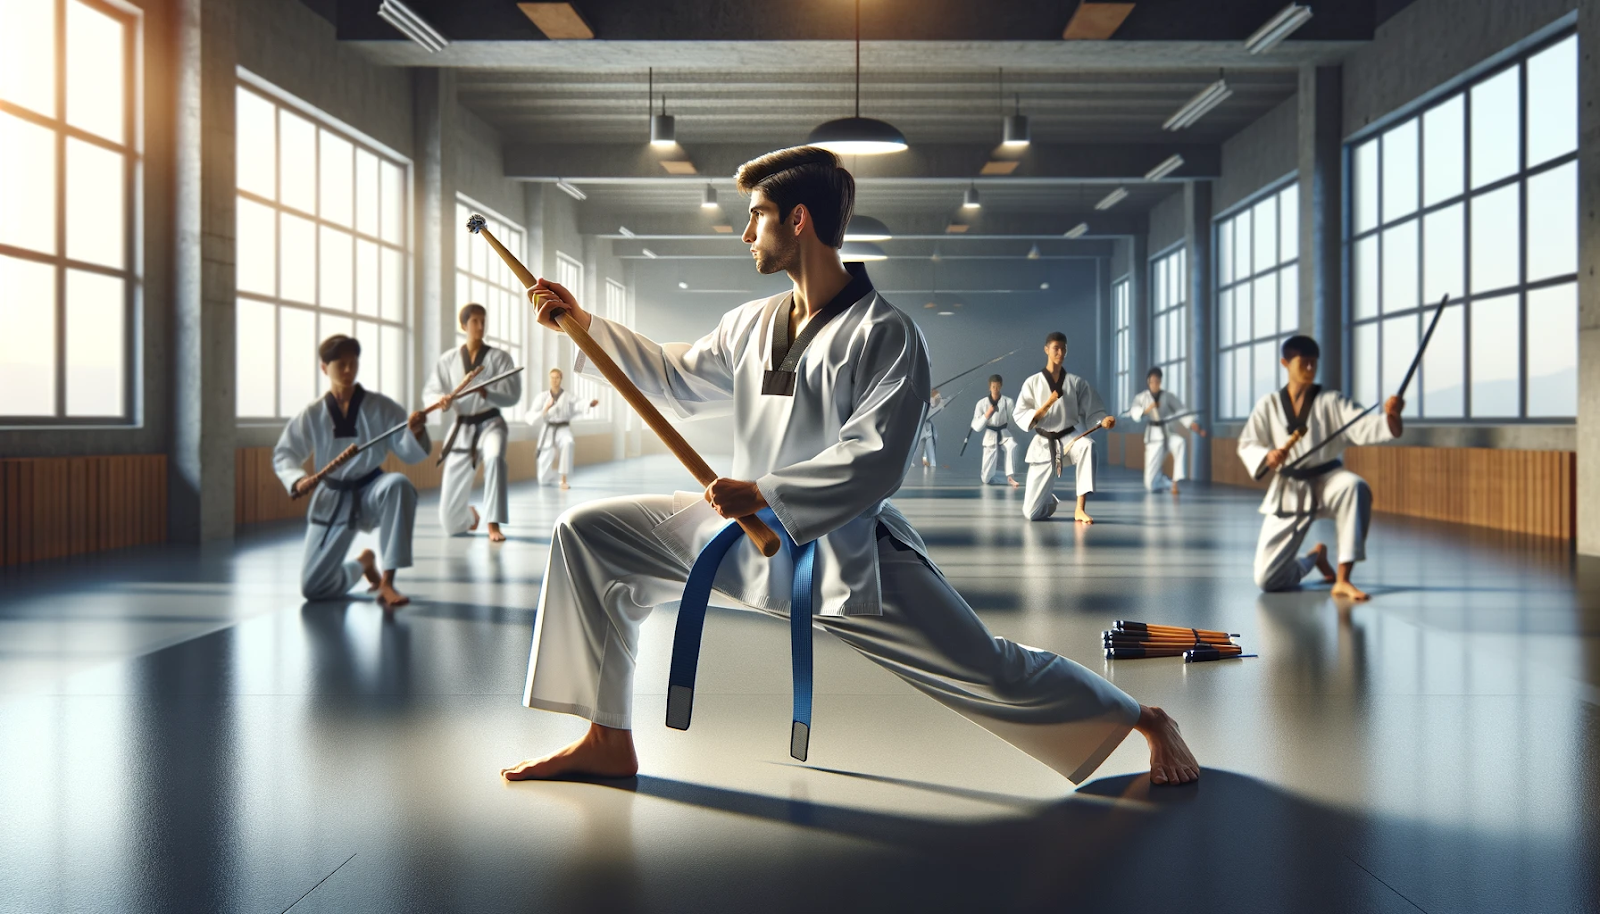 The scene features a Taekwondo practitioner in a dobok practicing with a bo staff in a dojo, with other students practicing with various weapons in the background. The atmosphere is focused and disciplined, highlighting the benefits of enhanced skills, improved discipline, and increased confidence.